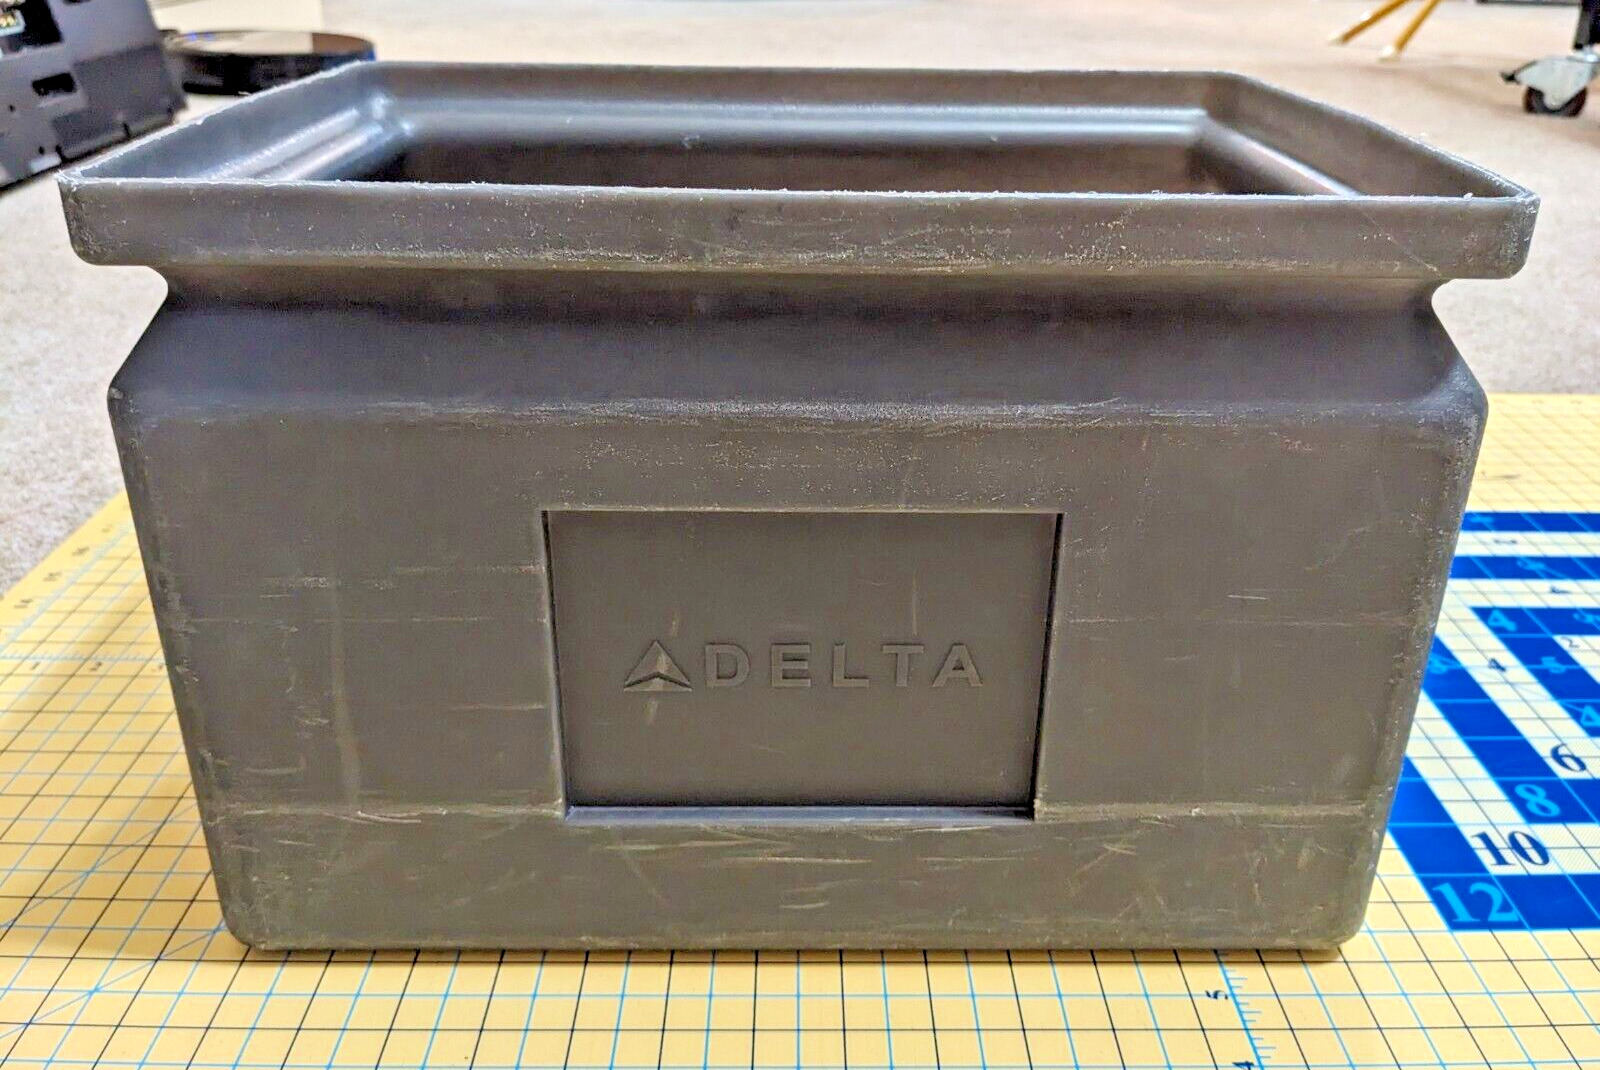 AUTHENTIC Delta Airlines Galley Cart Trolley Ice Bin, Drink Bucket, Gray, USED